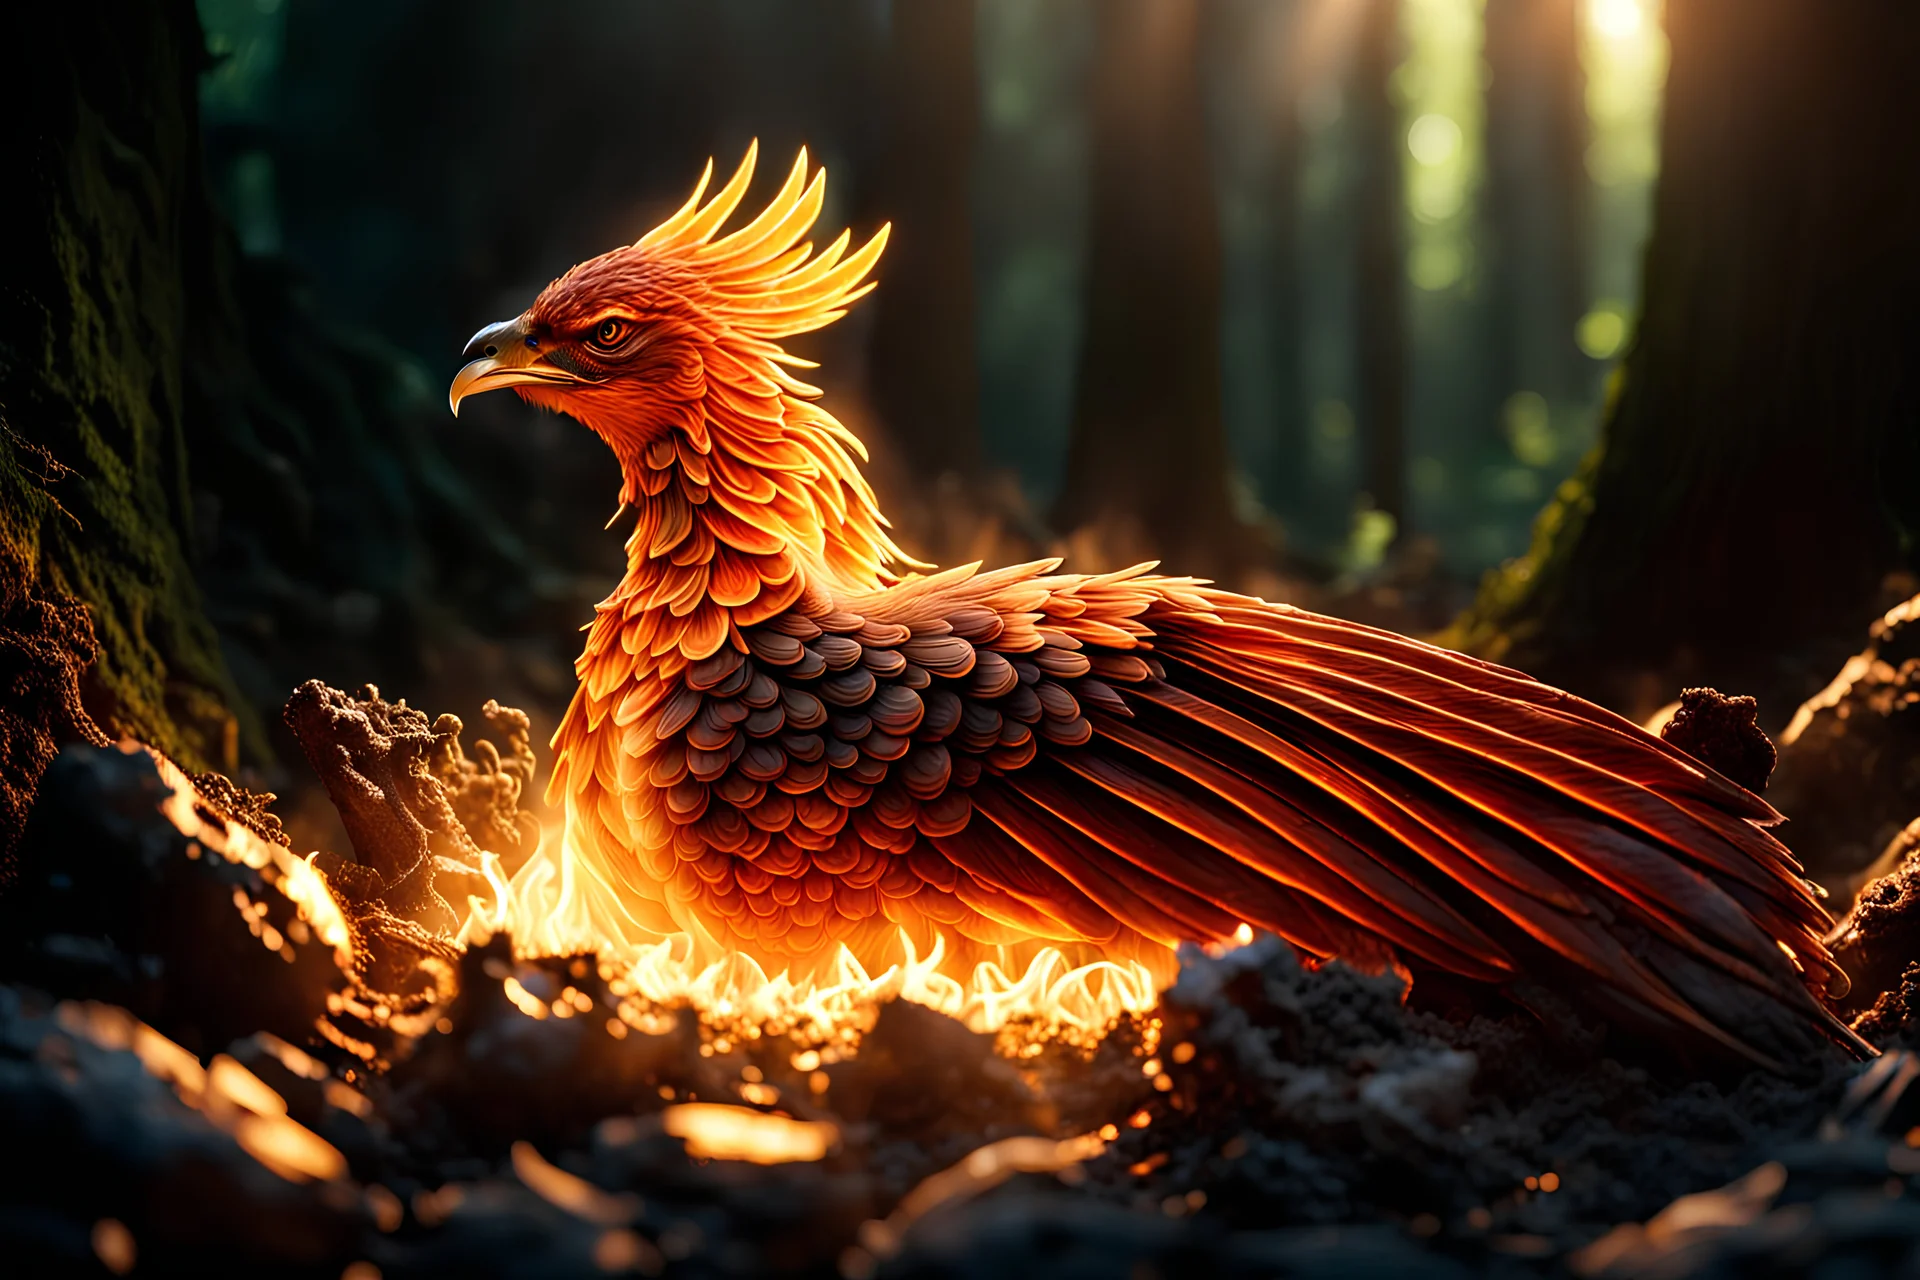 Extremely detailed and intricate scene of a new born phoenix cuddled up resting on a pile of smoking ashes, rays of sunlight shine on the phoenix, in the background is a dense dark forest, settings: f/8 aperture, hyper realistic, 4k